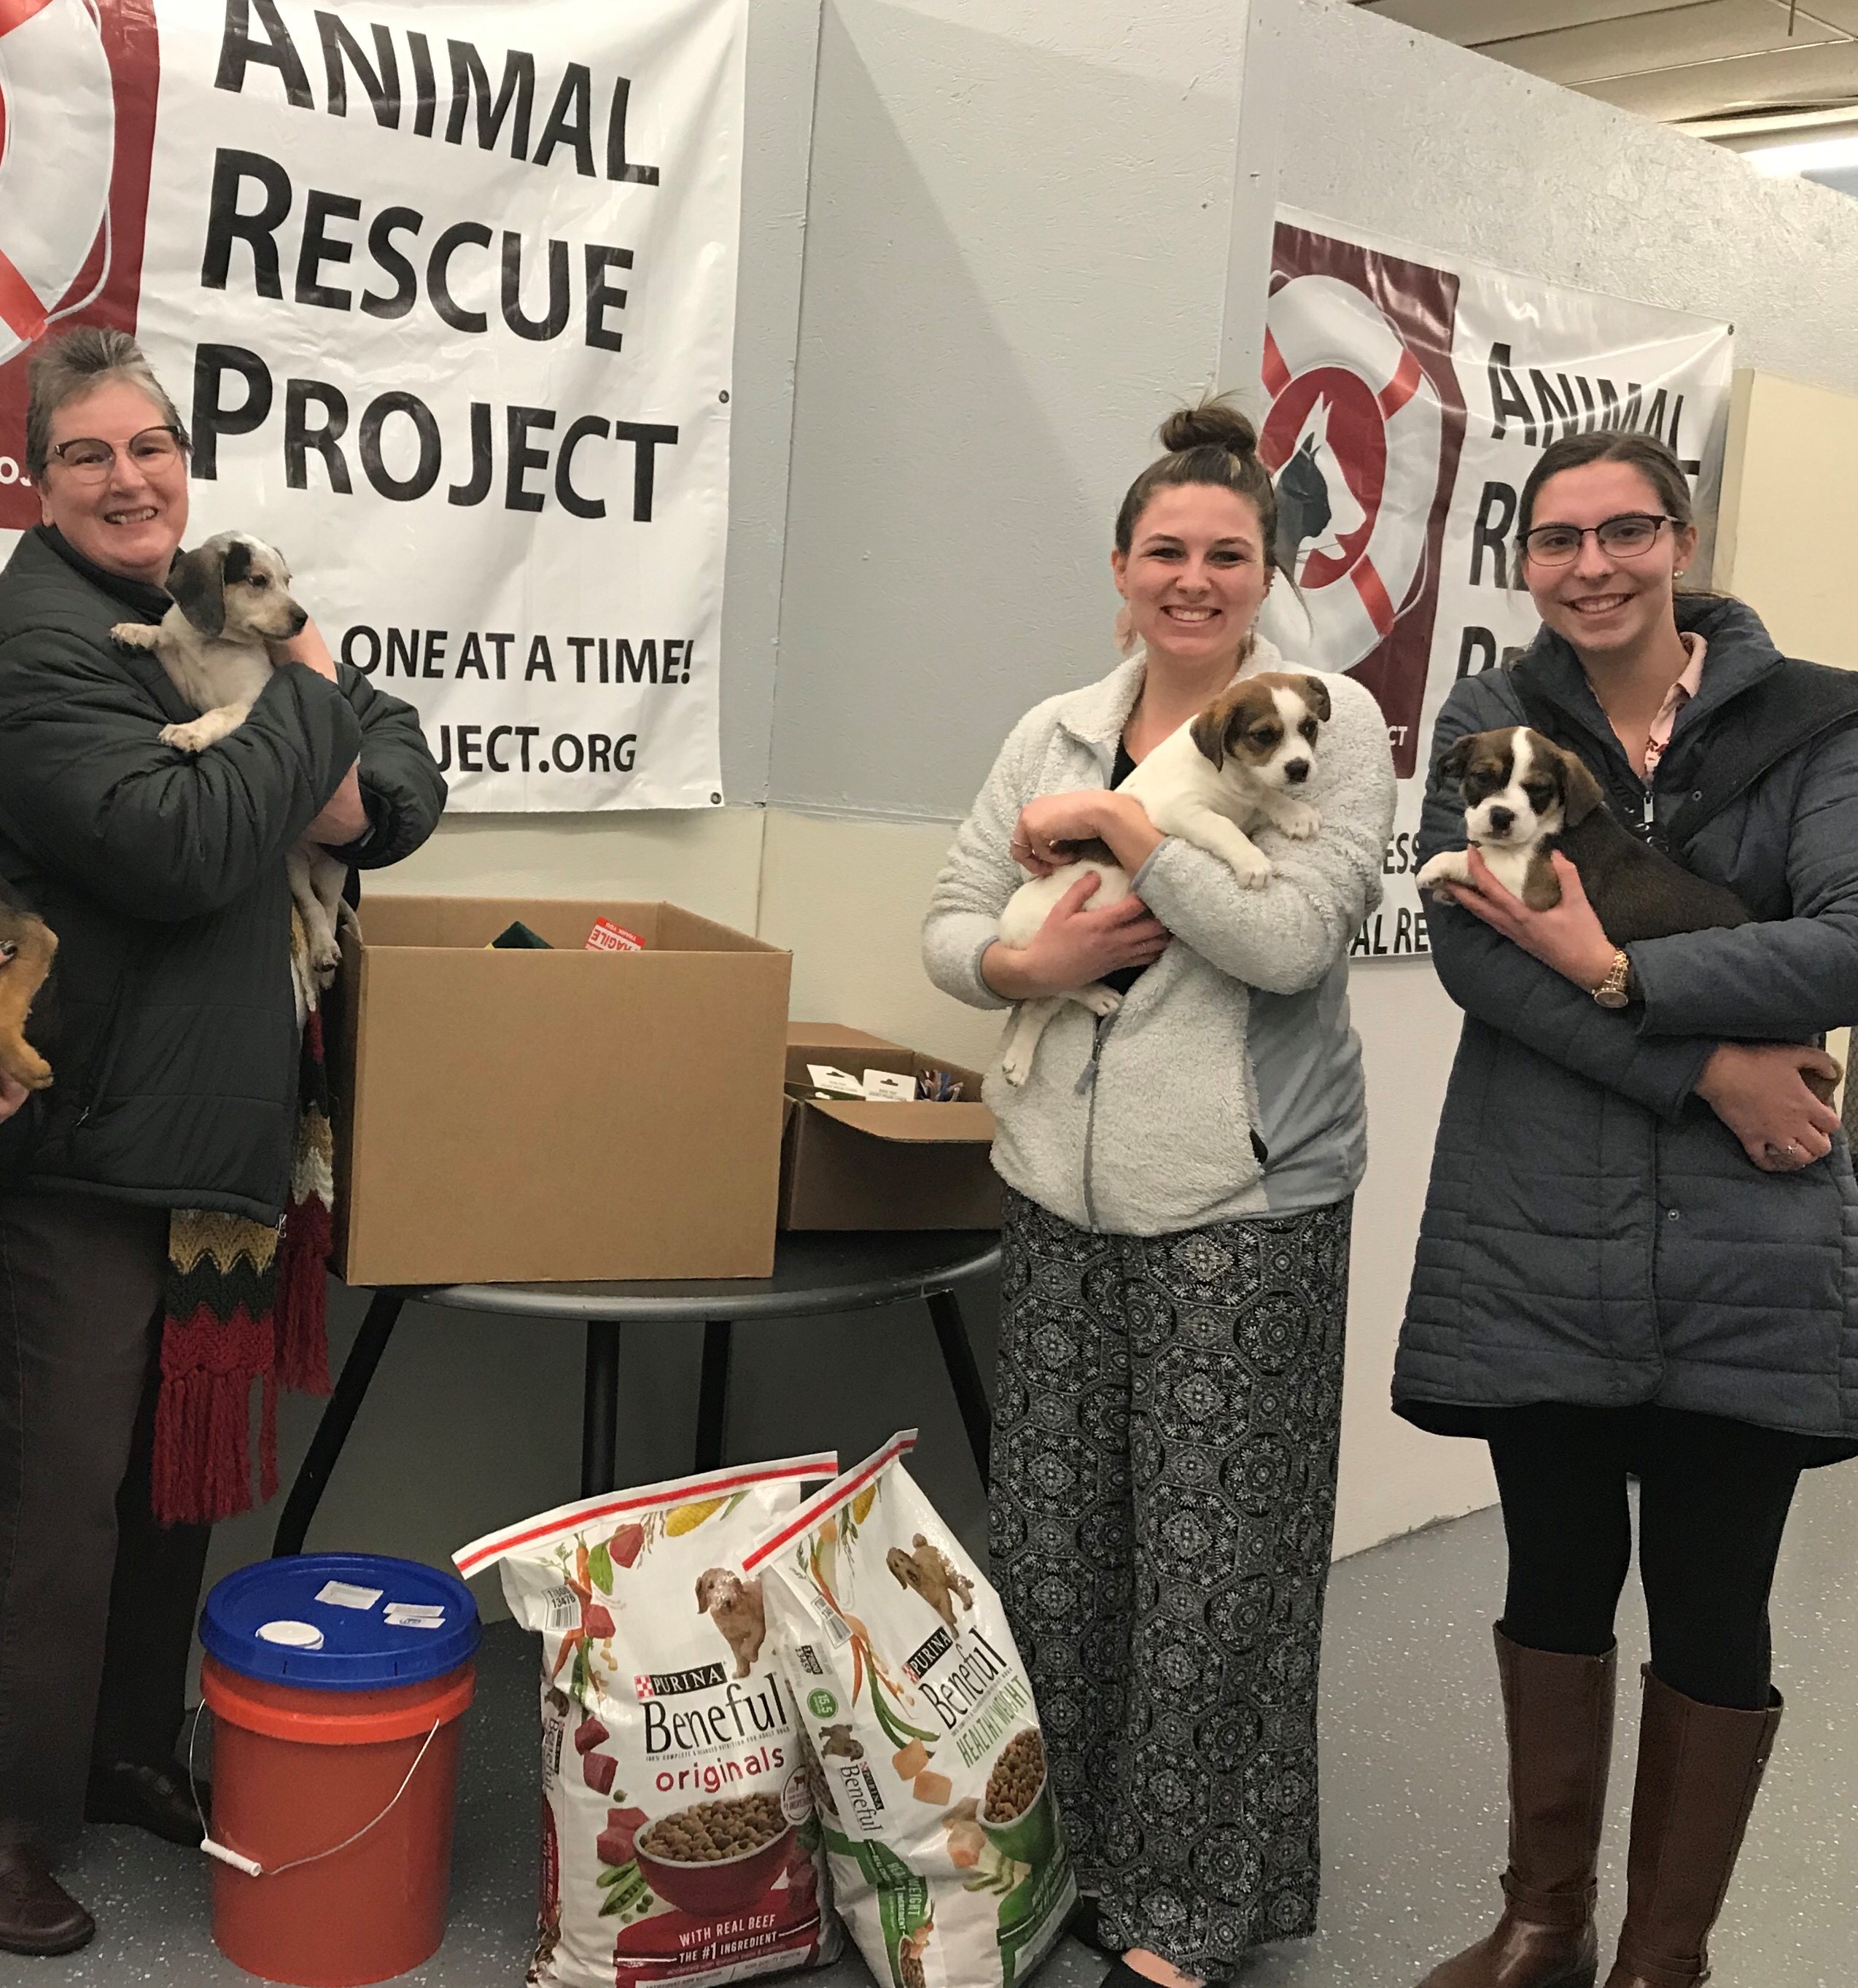 BlueOx Credit Union provides pet supplies to the Animal Rescue Project in Kalamazoo.